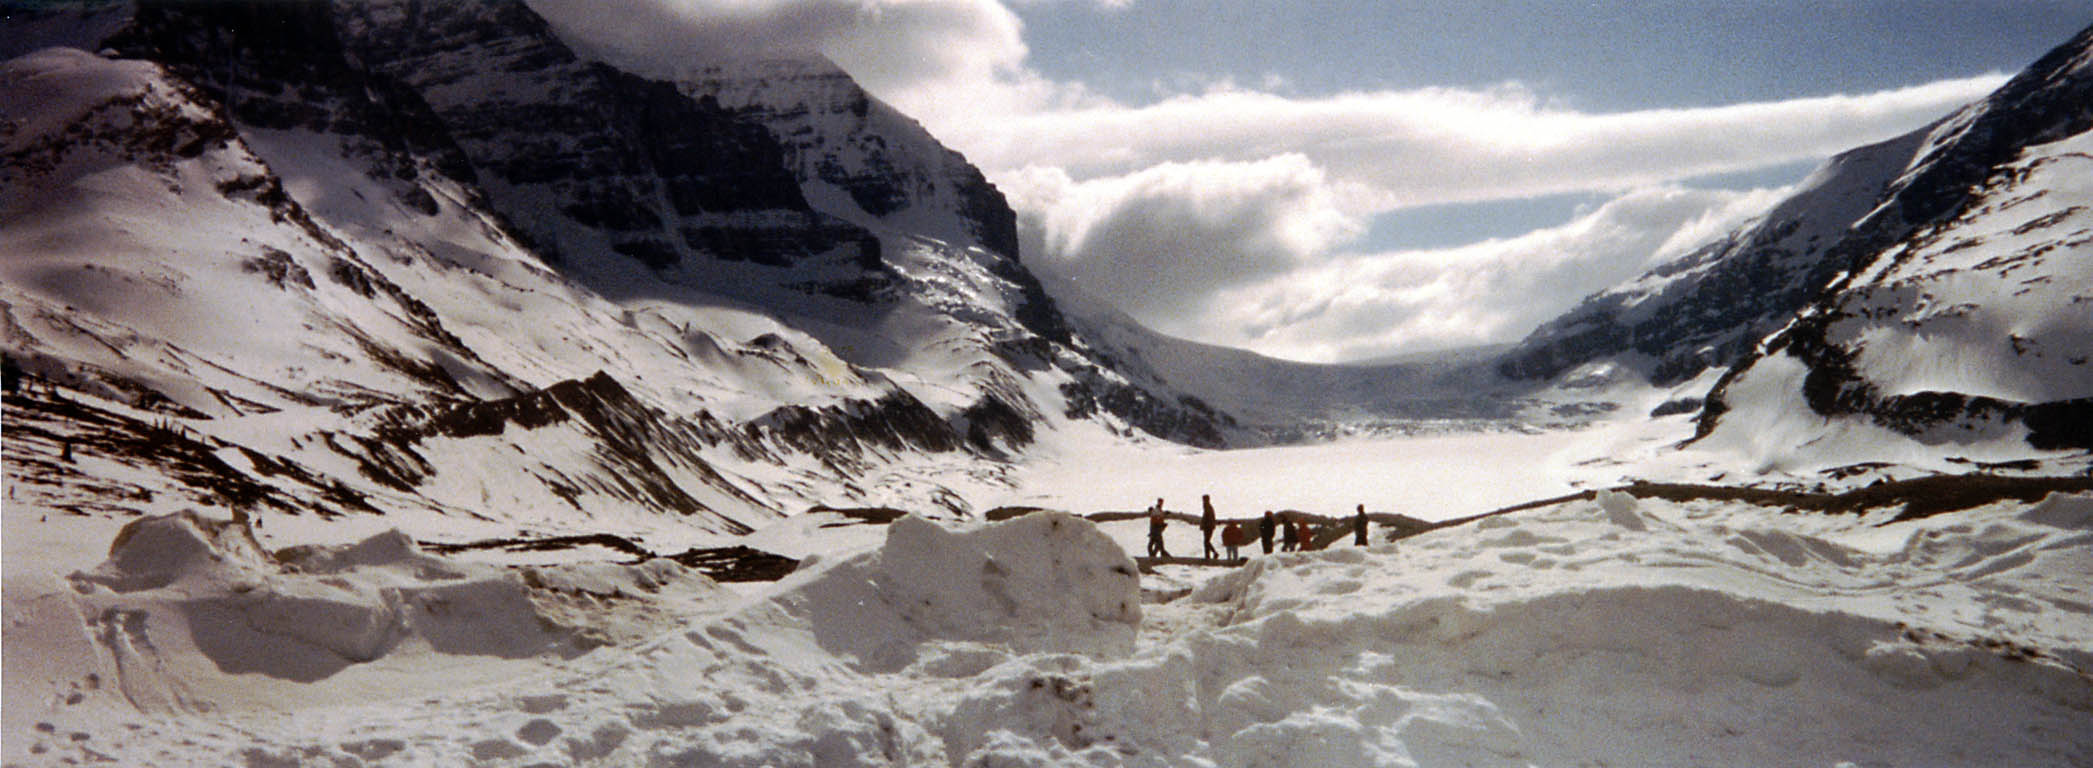 Our group hiking on Athabasca glacier. (Category:  Skiing)